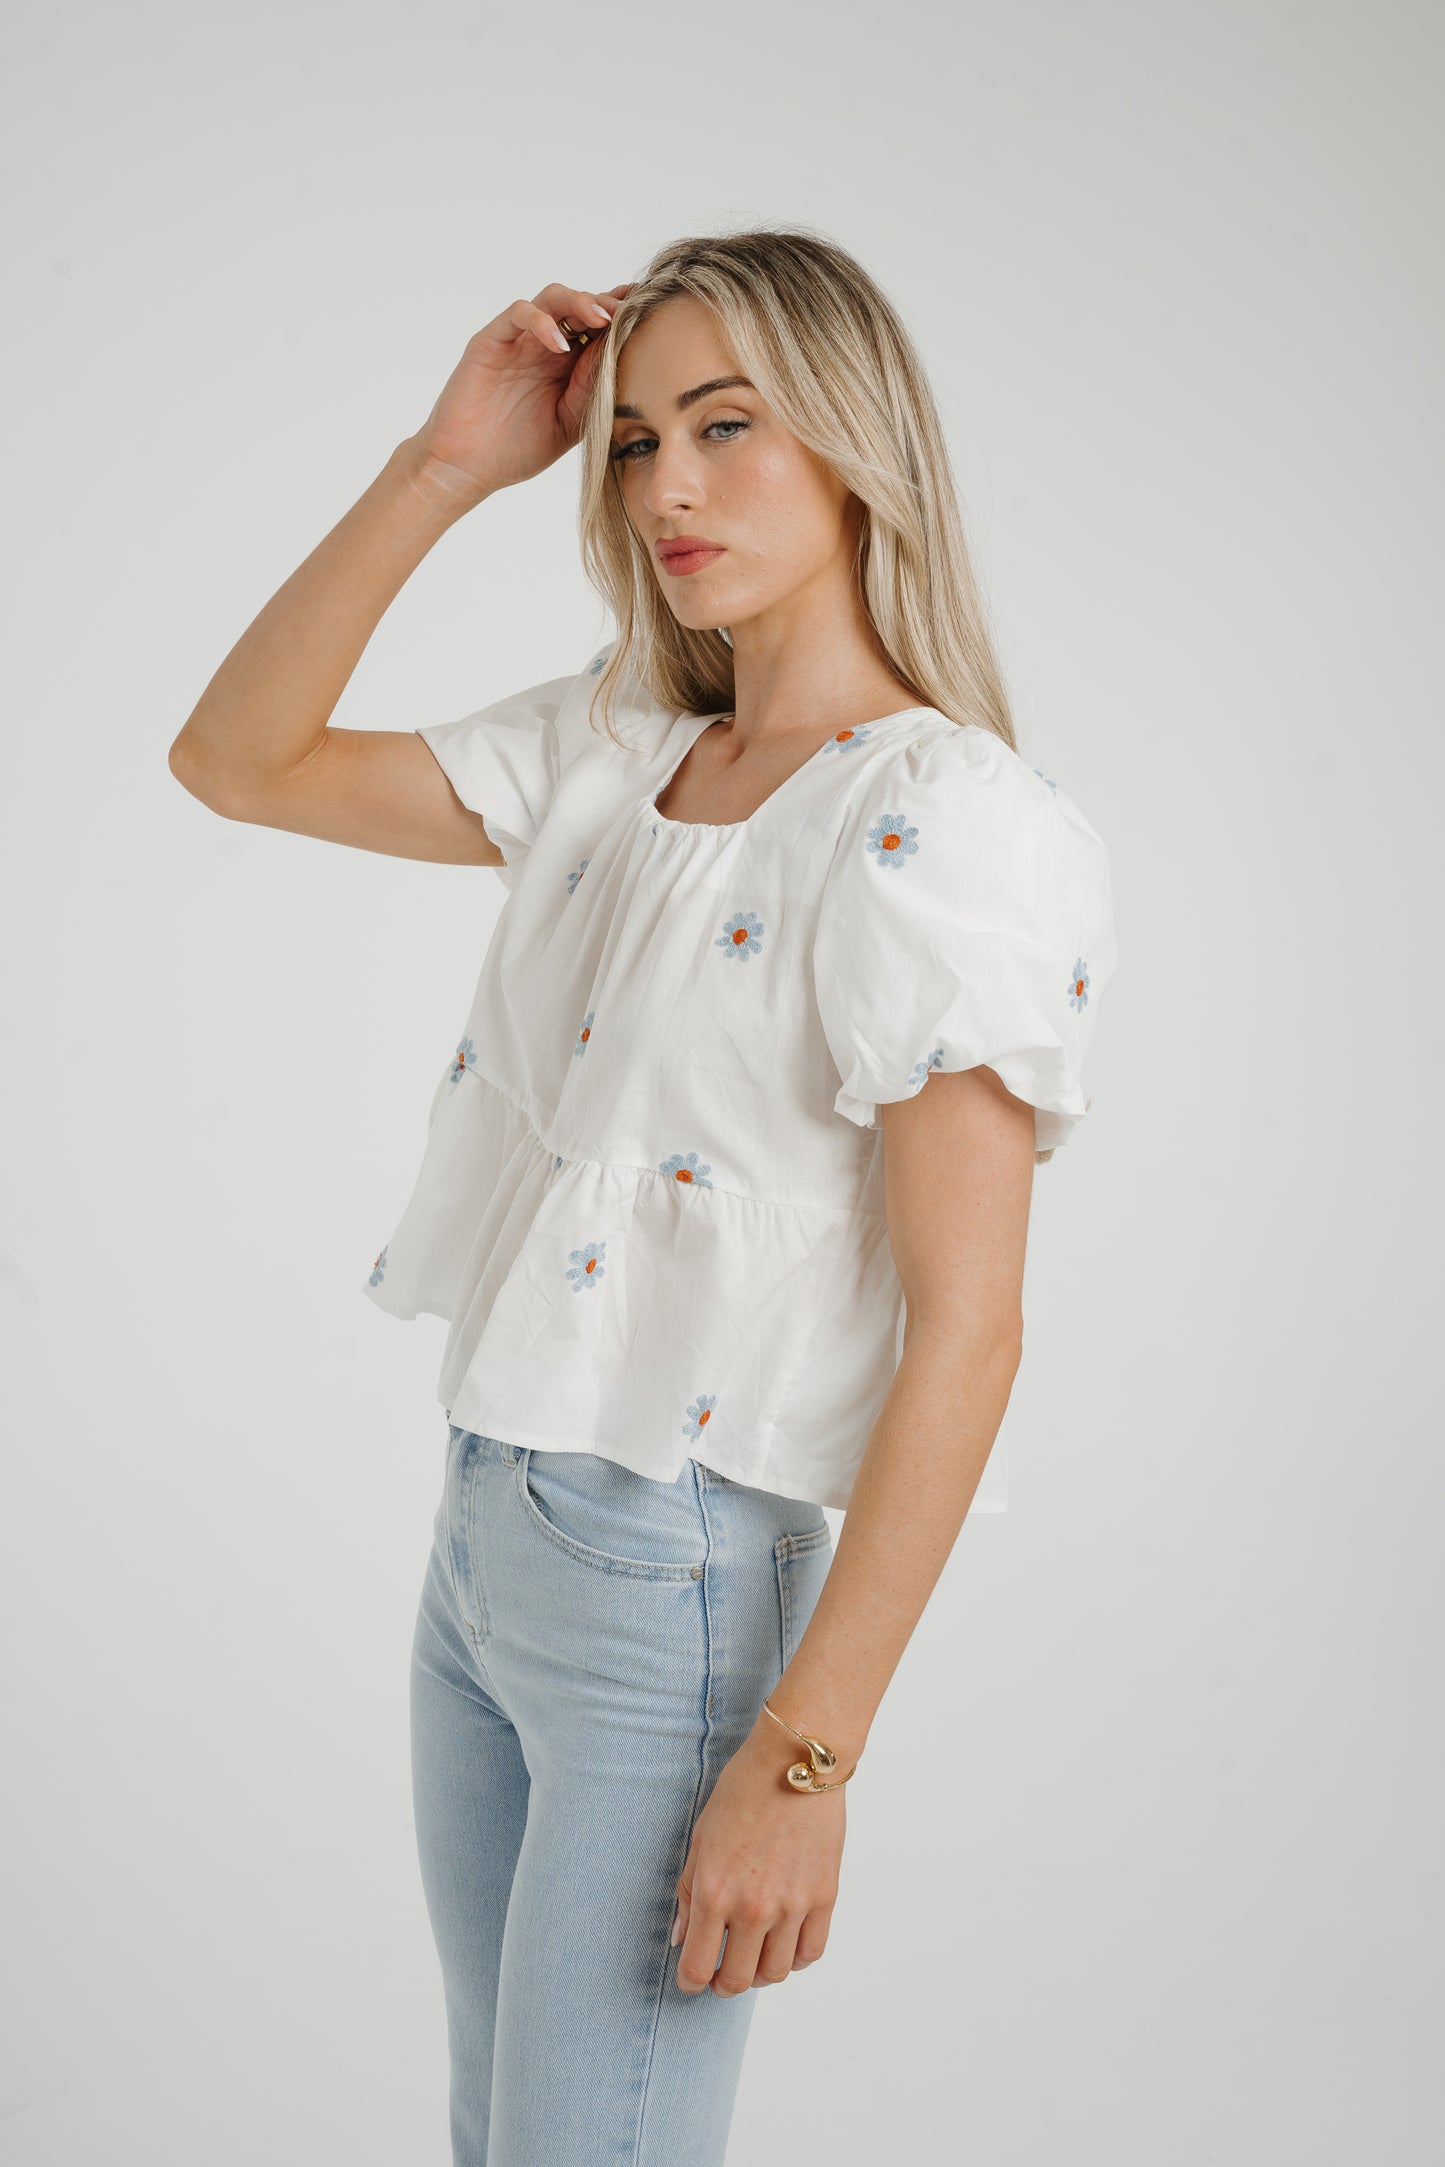 Holly Blue Floral Top In White